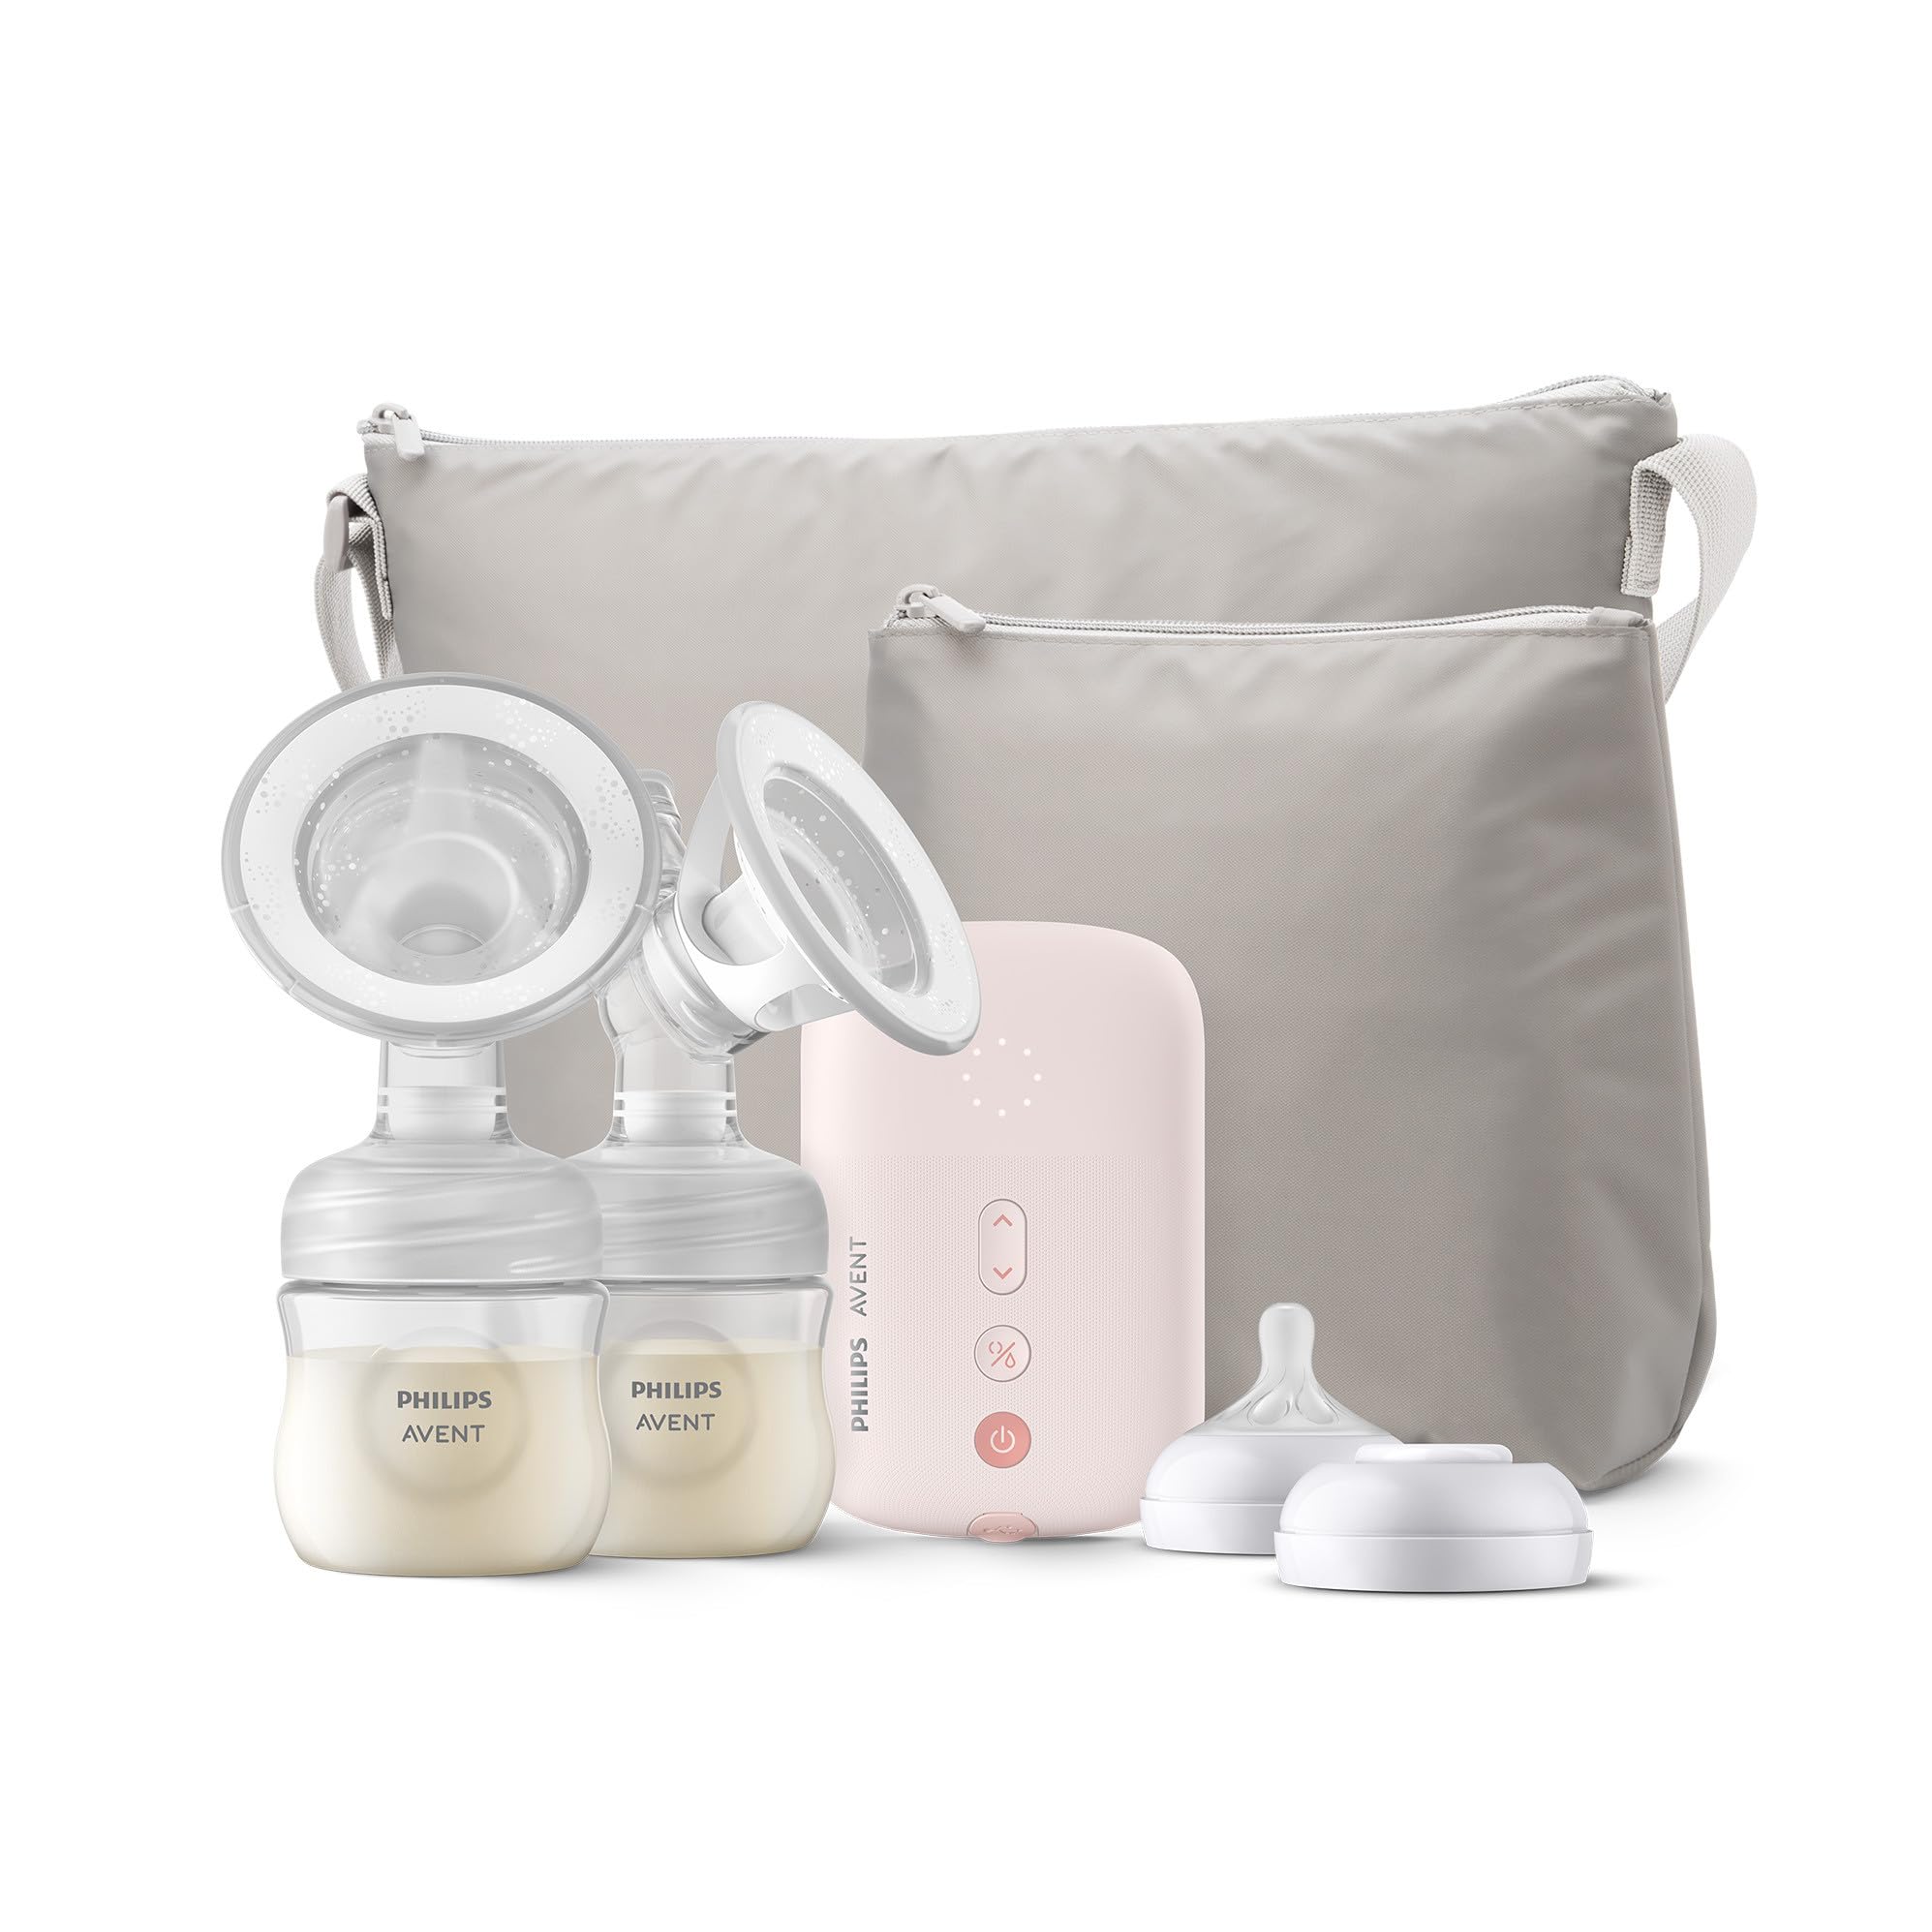 Philips Avent Double Electric Breast Pump - Electric Breast Pump, Hospital Strength, BPA-Free with Travel Bag and Pouch, SCF393/82